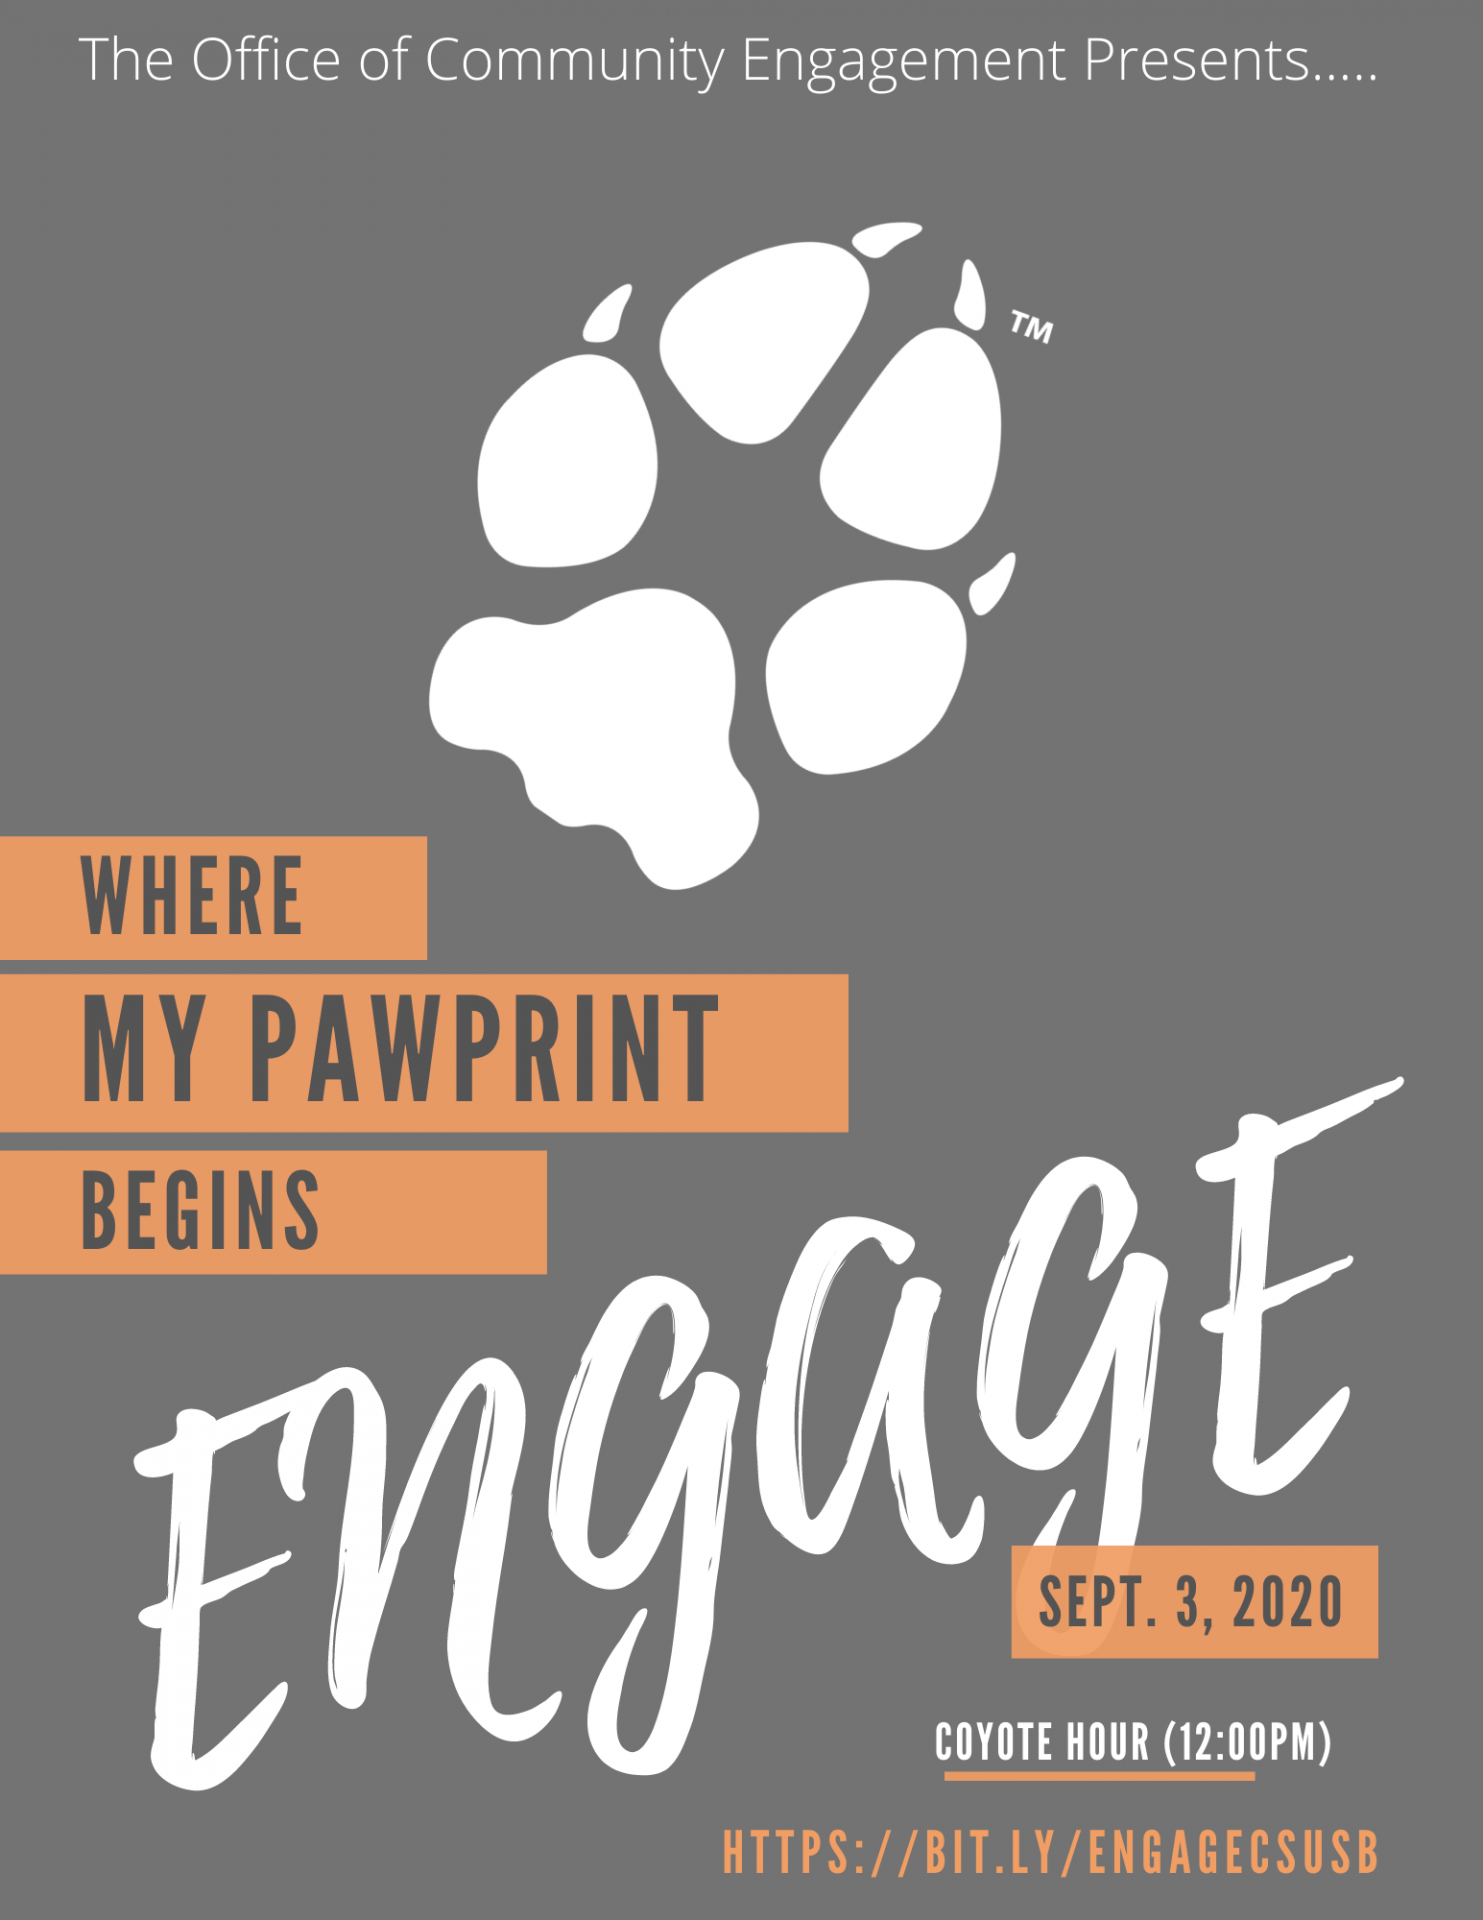 Where My Pawprint Begins Zoom Workshop on Thursday, Sept. 3 at Noon.